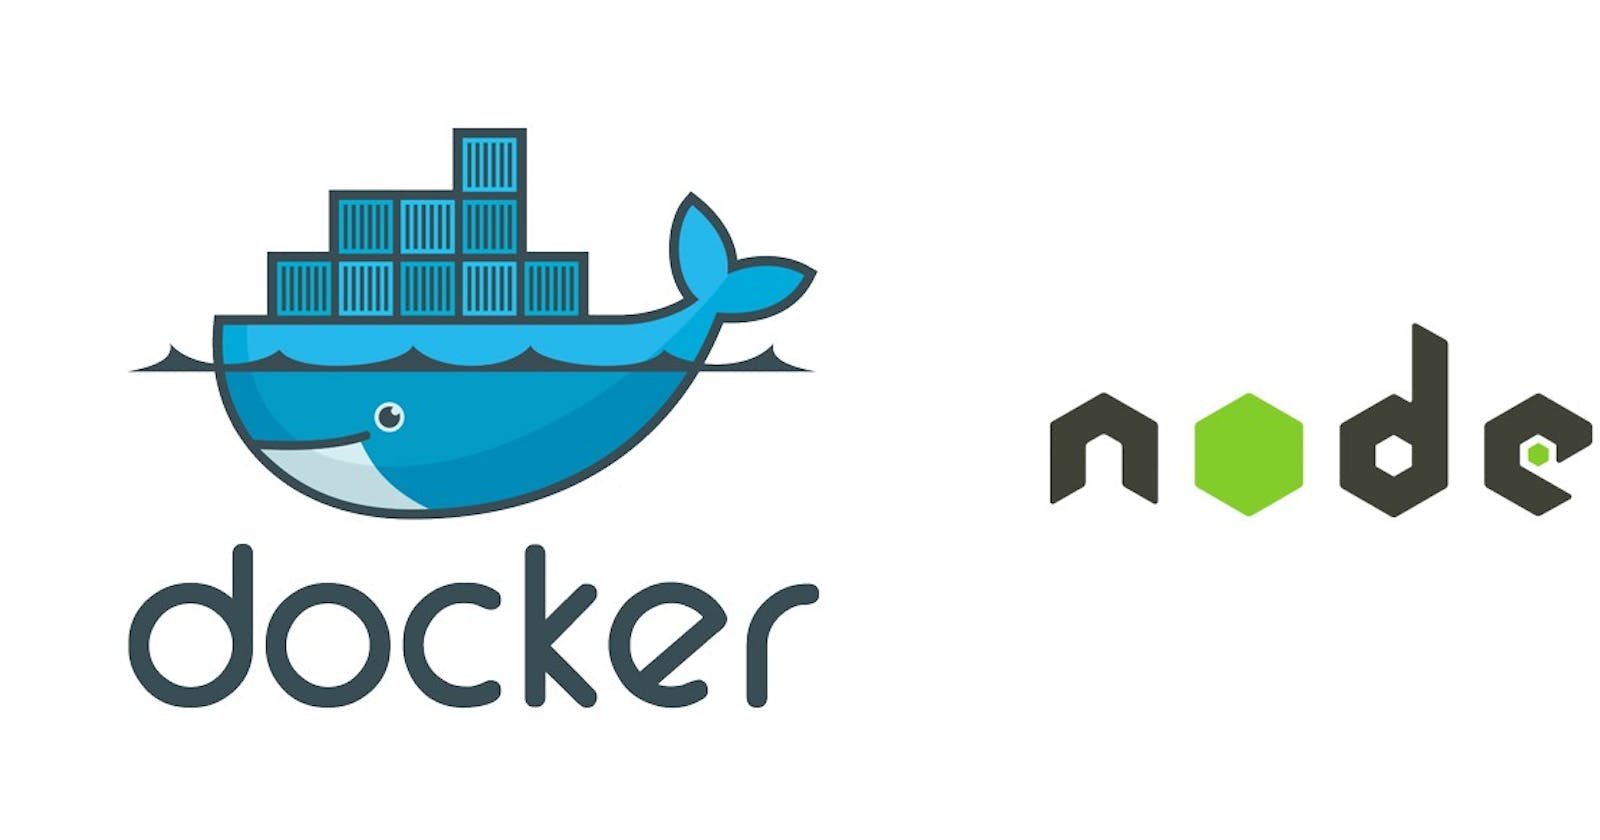 How to create a Node App within a Docker container